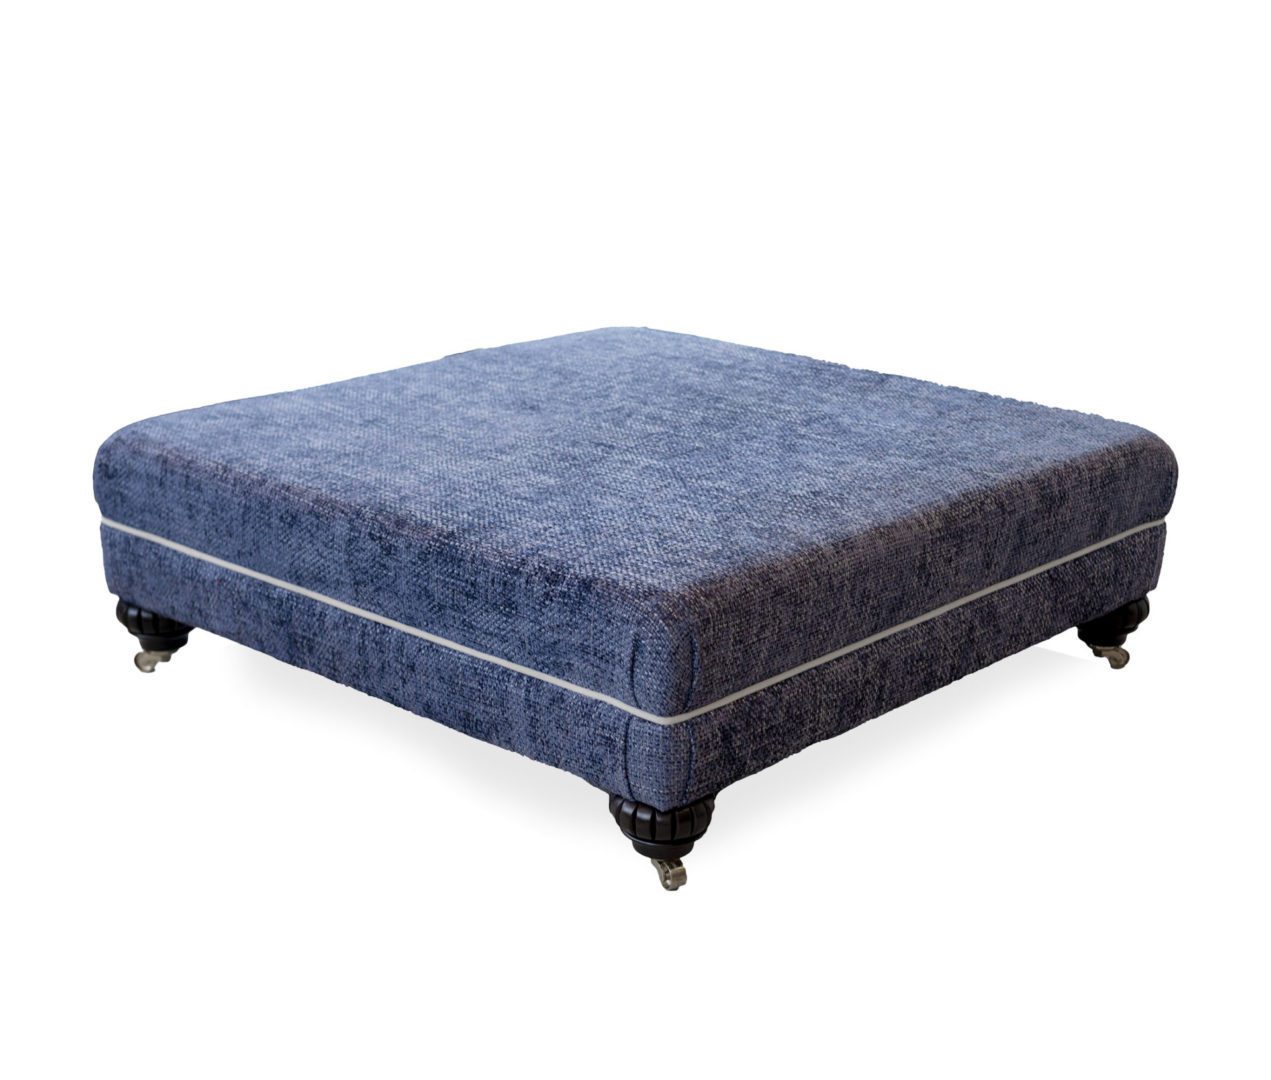 Ottogrand Footstool in Schino Denim, Gold Collection Fabric